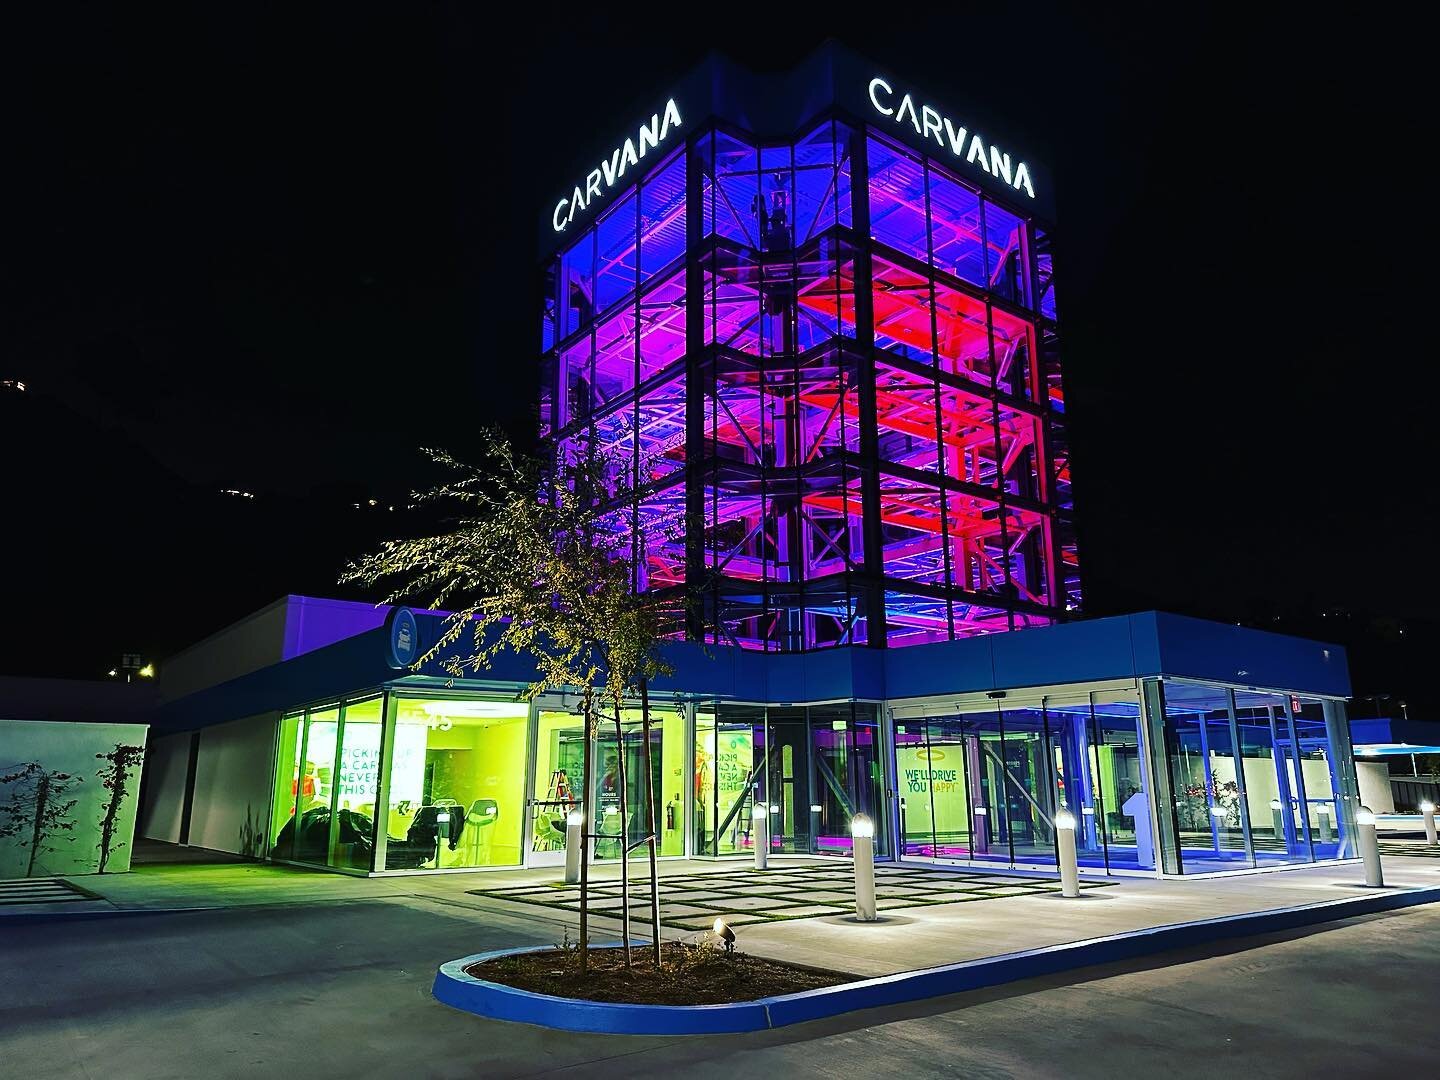 WOW! This one turned out cool! Once again great work guys! Thanks for everything @parkway.construction @gocarvana #neon #construction #electricians